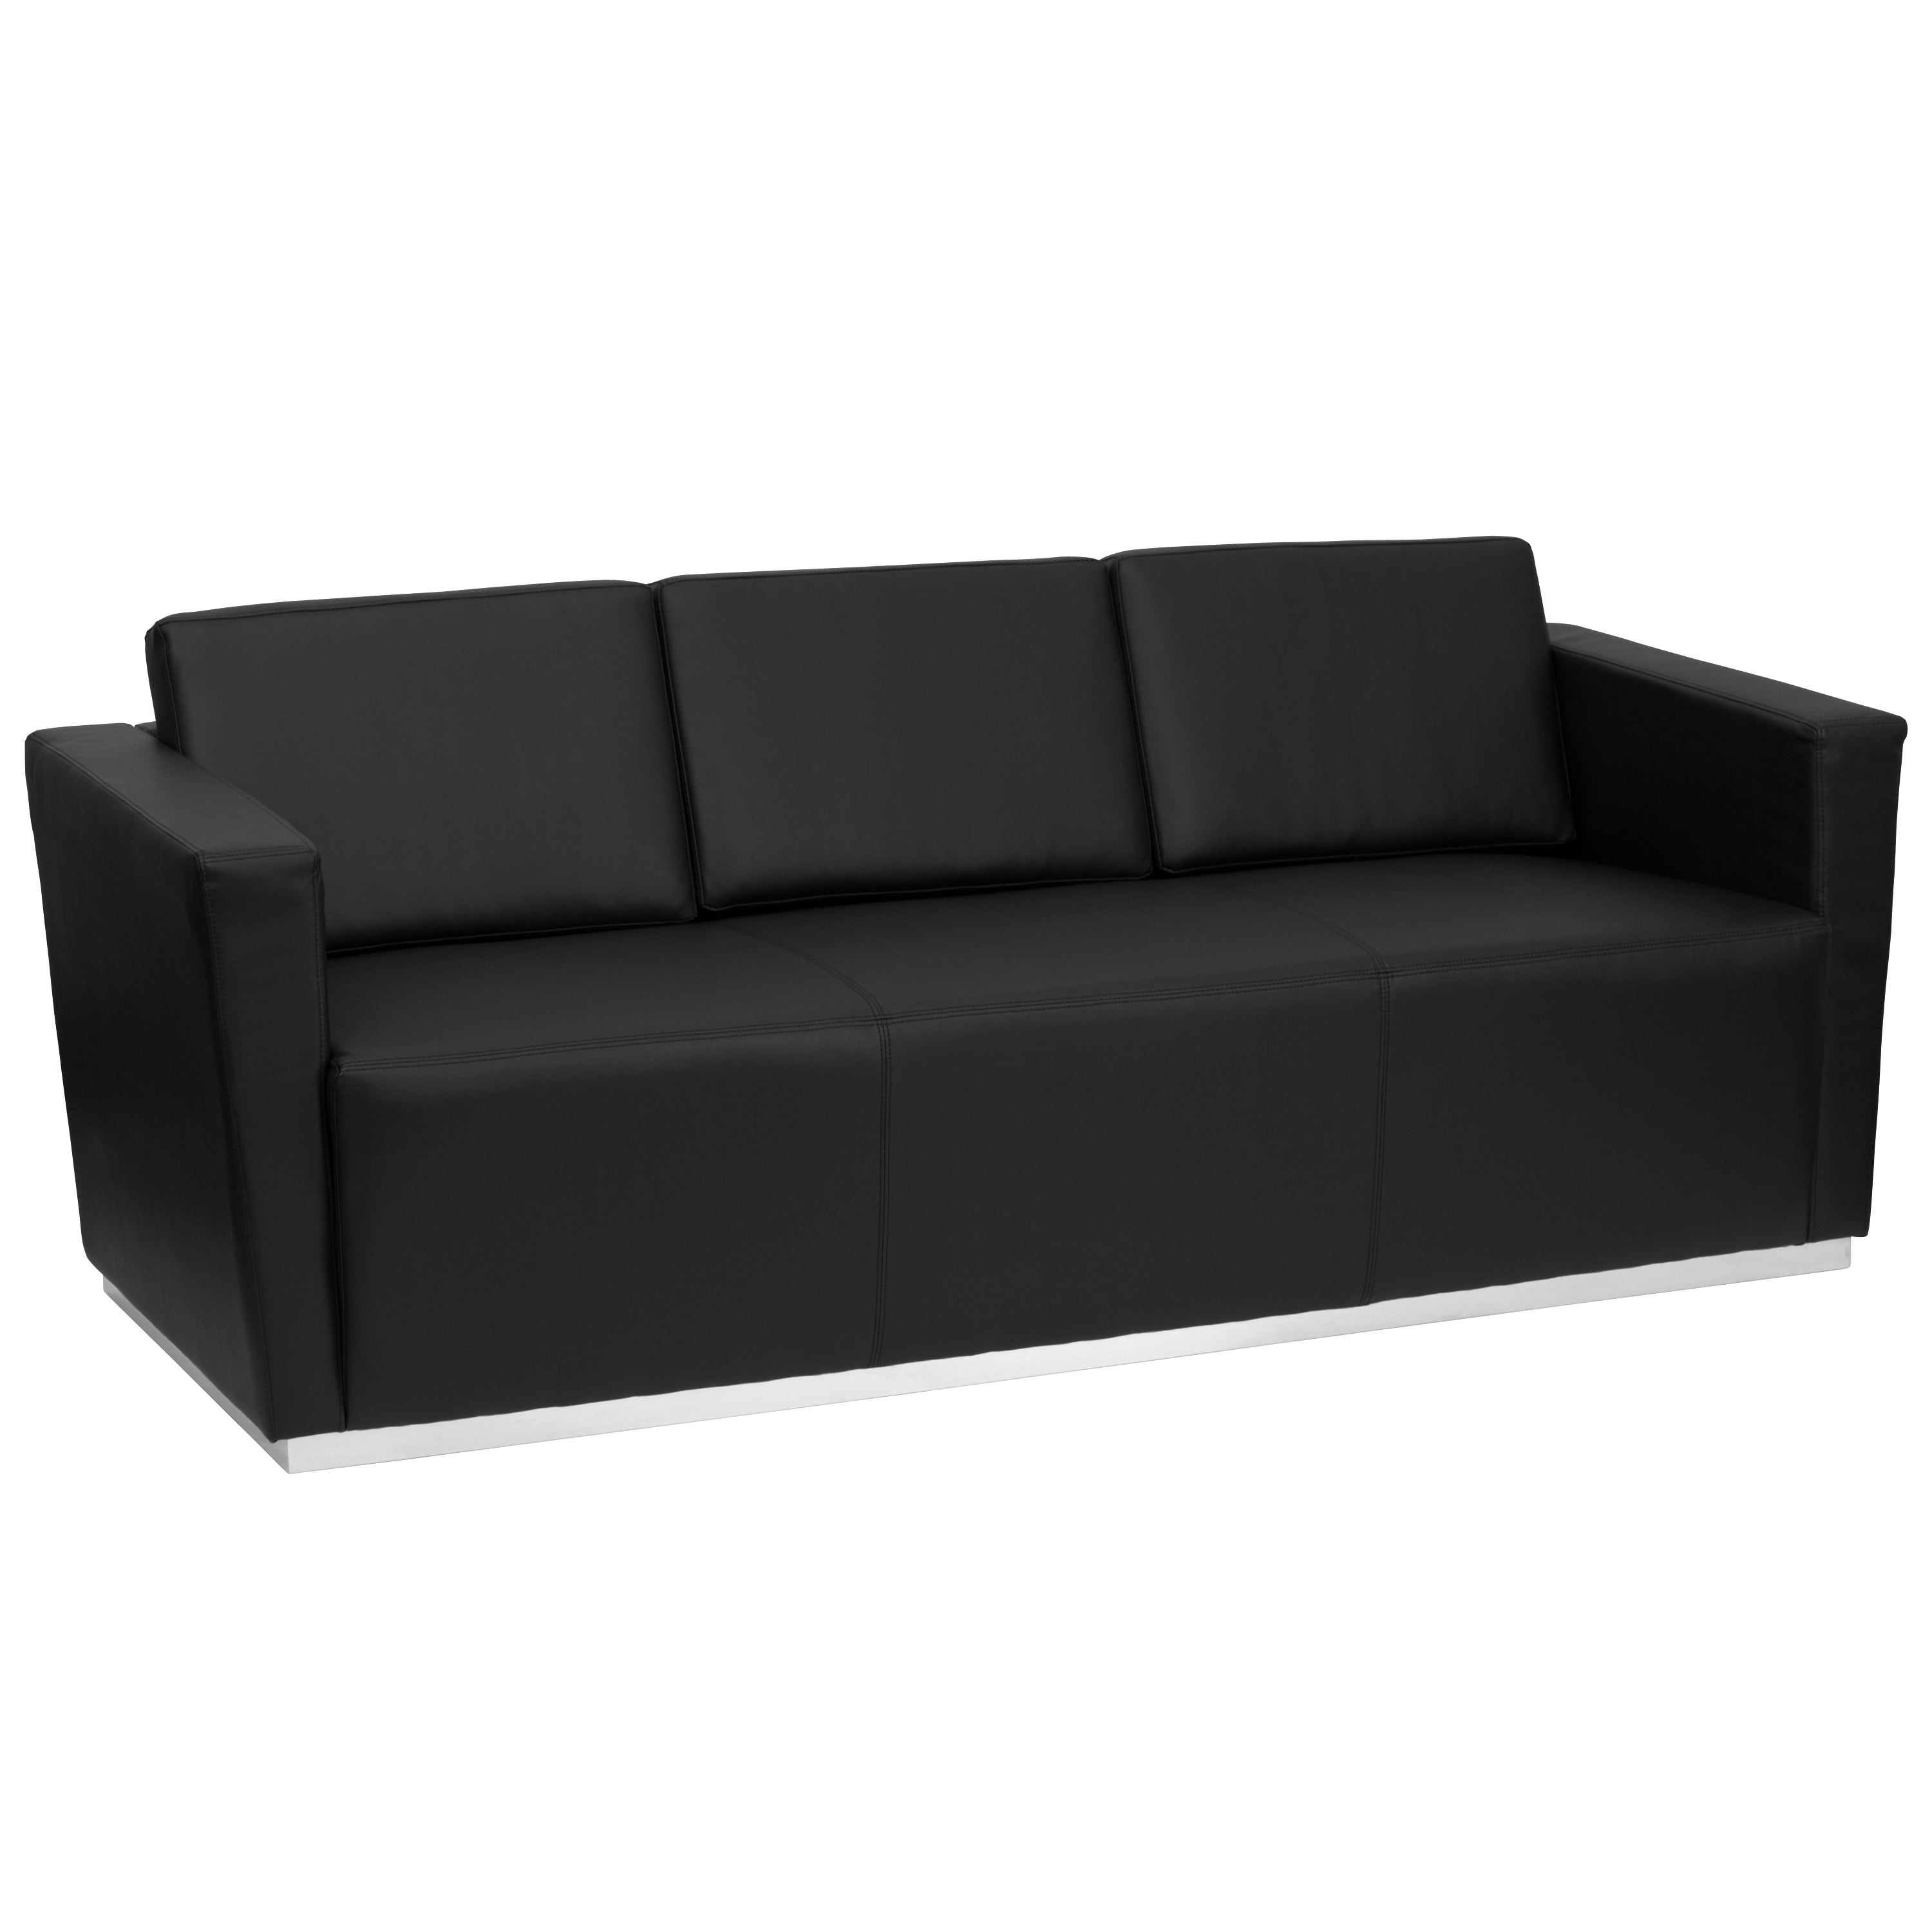 HERCULES Trinity Series Contemporary LeatherSoft Sofa with Stainless Steel Recessed Base-Reception Sofa-Flash Furniture-Wall2Wall Furnishings